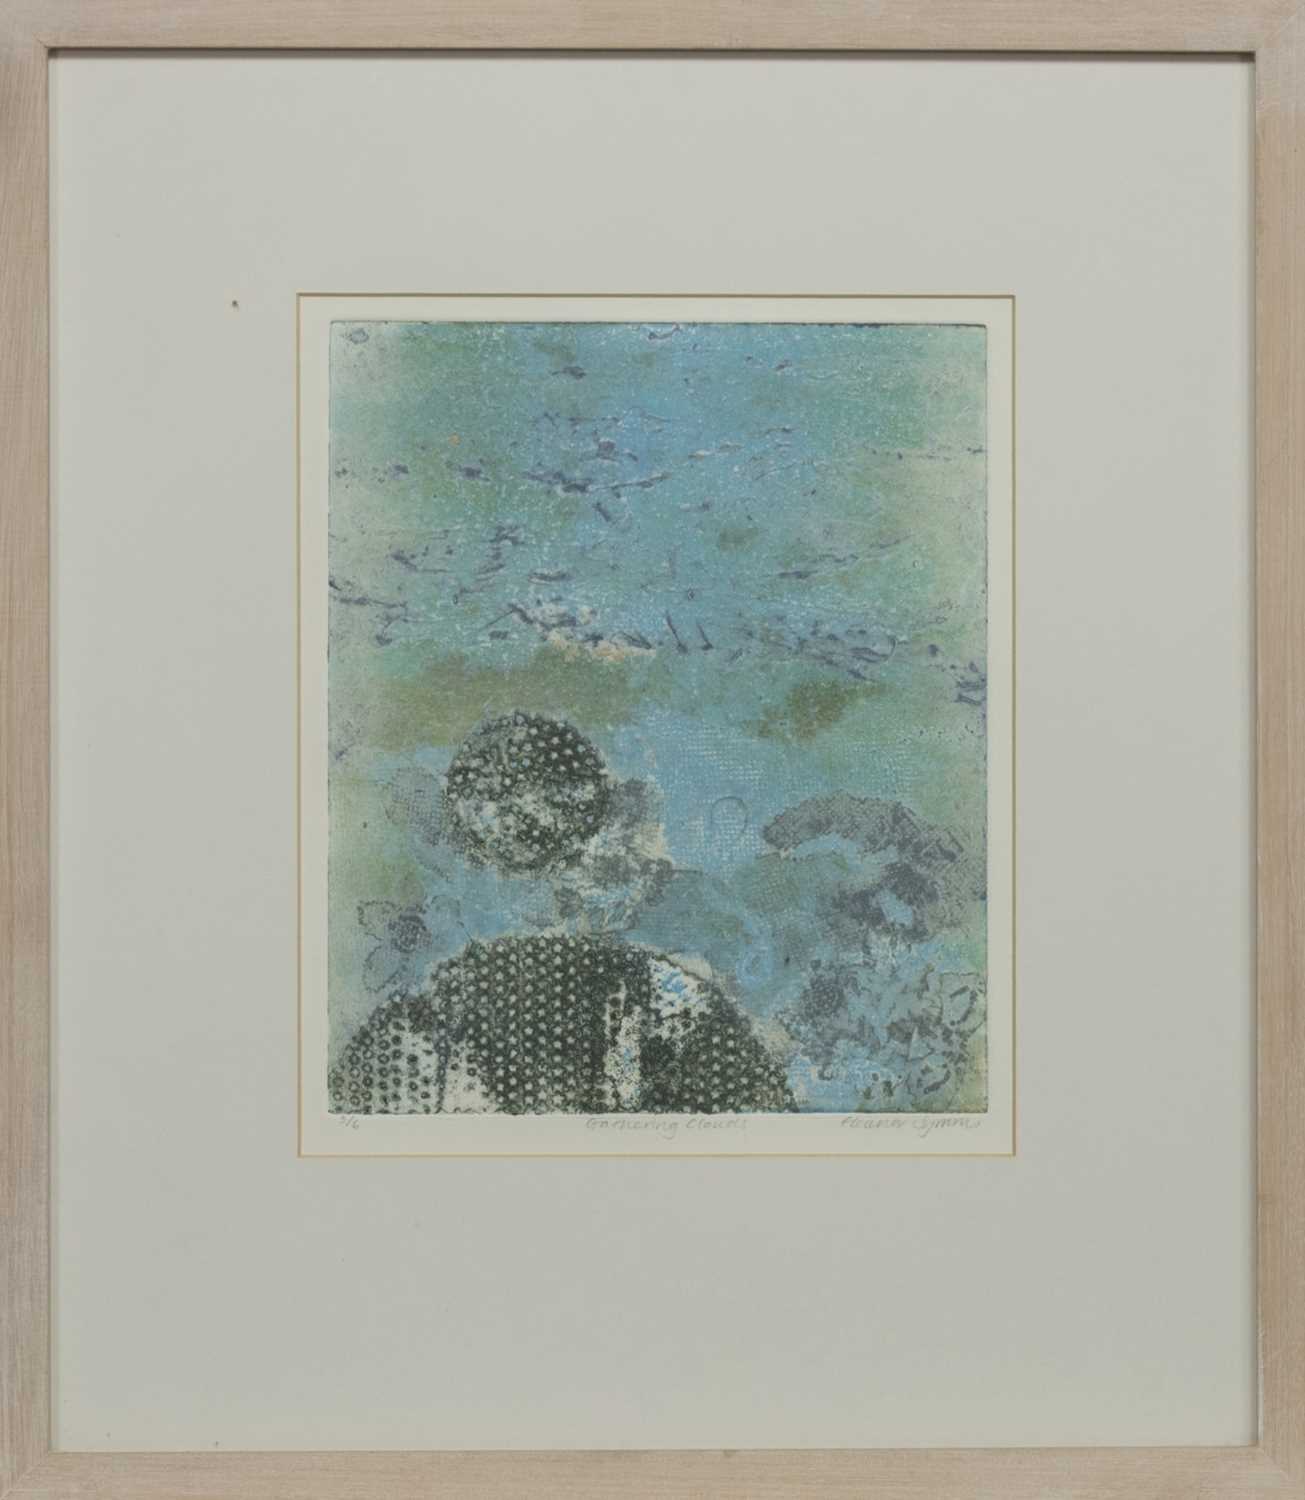 Lot 553 - GATHERING CLOUDS, AN ETCHING BY ELEANOR SYMMS